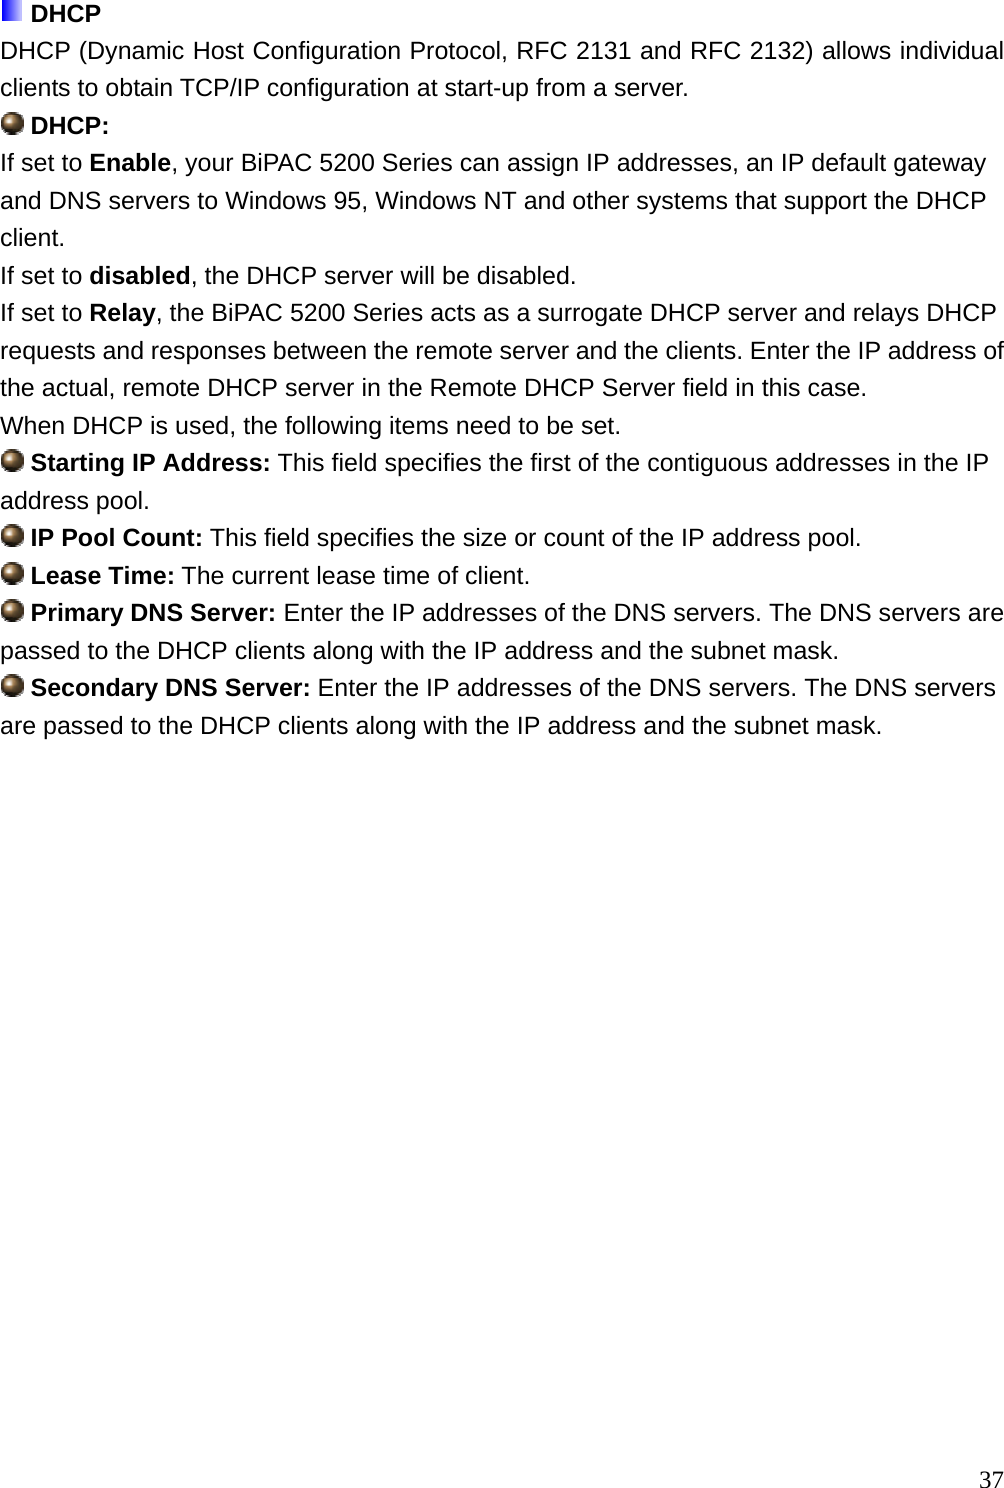  DHCP DHCP (Dynamic Host Configuration Protocol, RFC 2131 and RFC 2132) allows individual clients to obtain TCP/IP configuration at start-up from a server.  DHCP:  If set to Enable, your BiPAC 5200 Series can assign IP addresses, an IP default gateway and DNS servers to Windows 95, Windows NT and other systems that support the DHCP client. If set to disabled, the DHCP server will be disabled. If set to Relay, the BiPAC 5200 Series acts as a surrogate DHCP server and relays DHCP requests and responses between the remote server and the clients. Enter the IP address of the actual, remote DHCP server in the Remote DHCP Server field in this case. When DHCP is used, the following items need to be set.  Starting IP Address: This field specifies the first of the contiguous addresses in the IP address pool.  IP Pool Count: This field specifies the size or count of the IP address pool.  Lease Time: The current lease time of client.  Primary DNS Server: Enter the IP addresses of the DNS servers. The DNS servers are passed to the DHCP clients along with the IP address and the subnet mask.  Secondary DNS Server: Enter the IP addresses of the DNS servers. The DNS servers are passed to the DHCP clients along with the IP address and the subnet mask.                    37